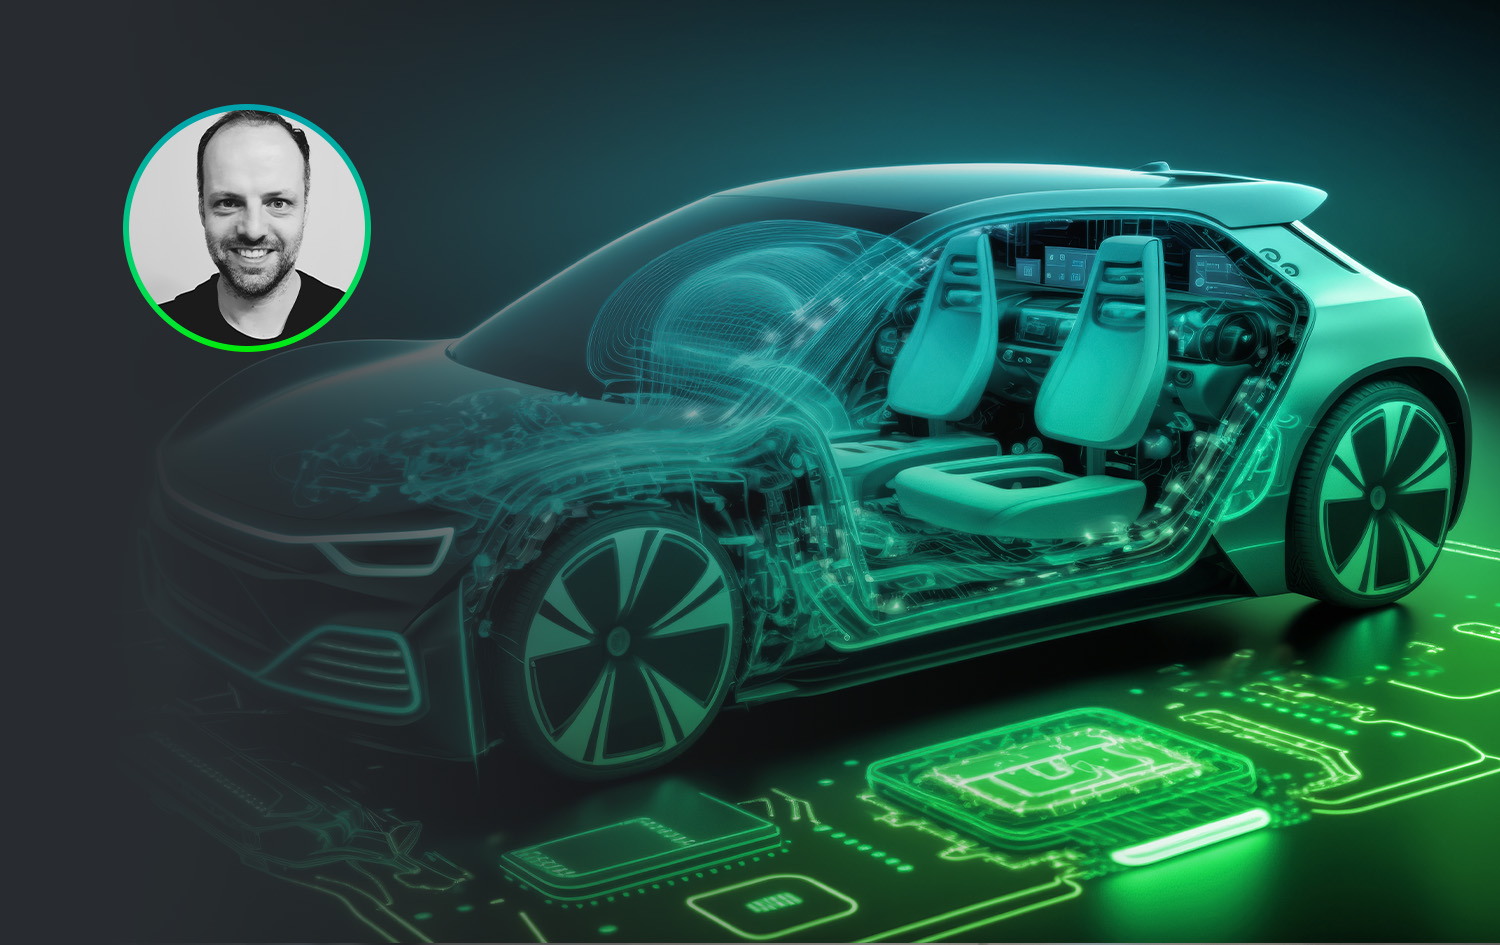 The role of the Automotive OS in software-defined vehicles